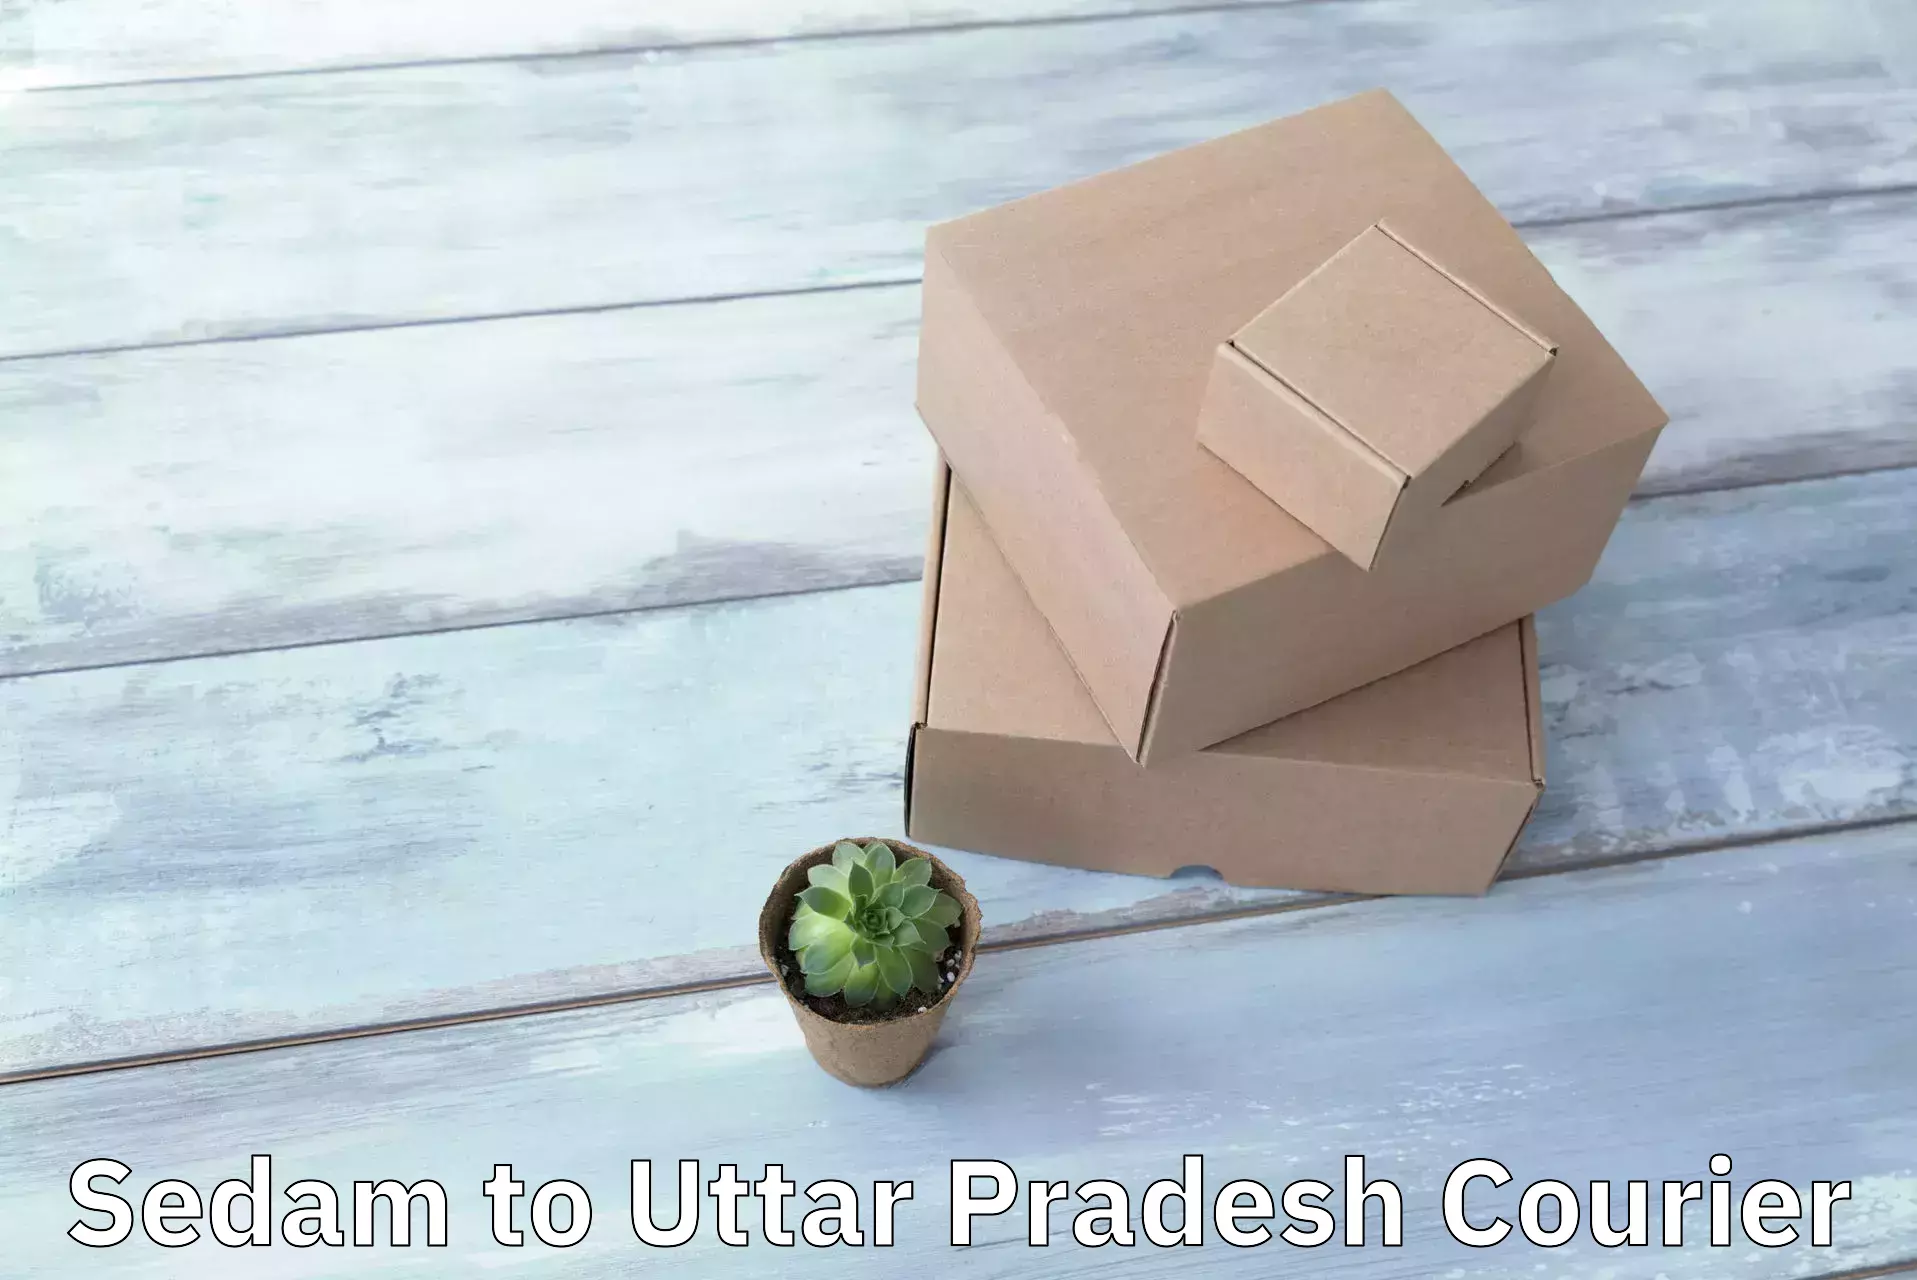 Parcel handling and care in Sedam to Saharanpur